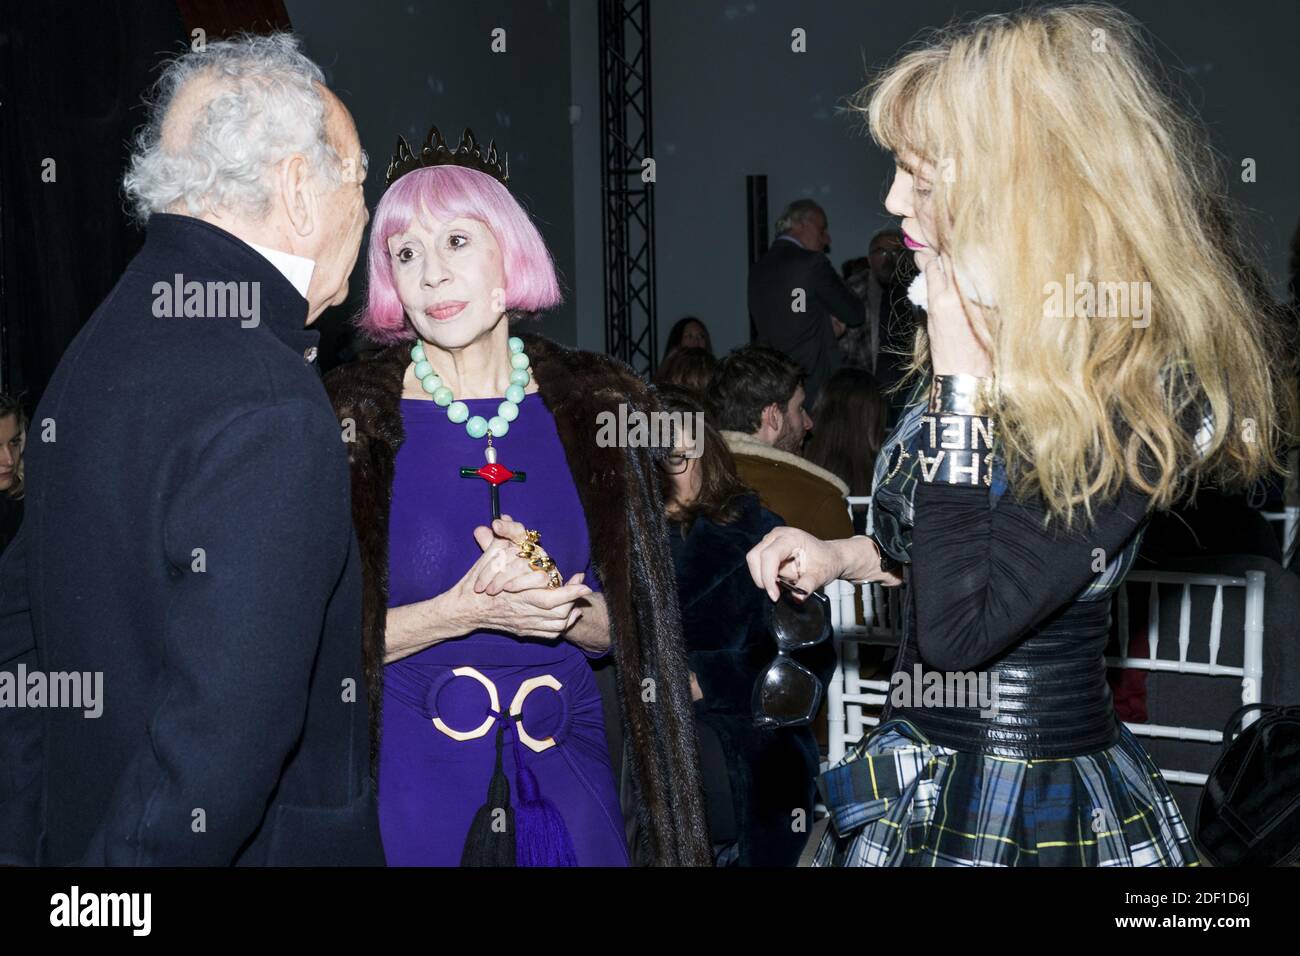 Marie Beltrami attending Alexis Mabille Spring/Summer 2020 Haute-Couture  show as part of Paris Fashion Week in Paris, France on January 21, 2020.  Photo by Jana Call me J/ABACAPRESS.COM Stock Photo - Alamy